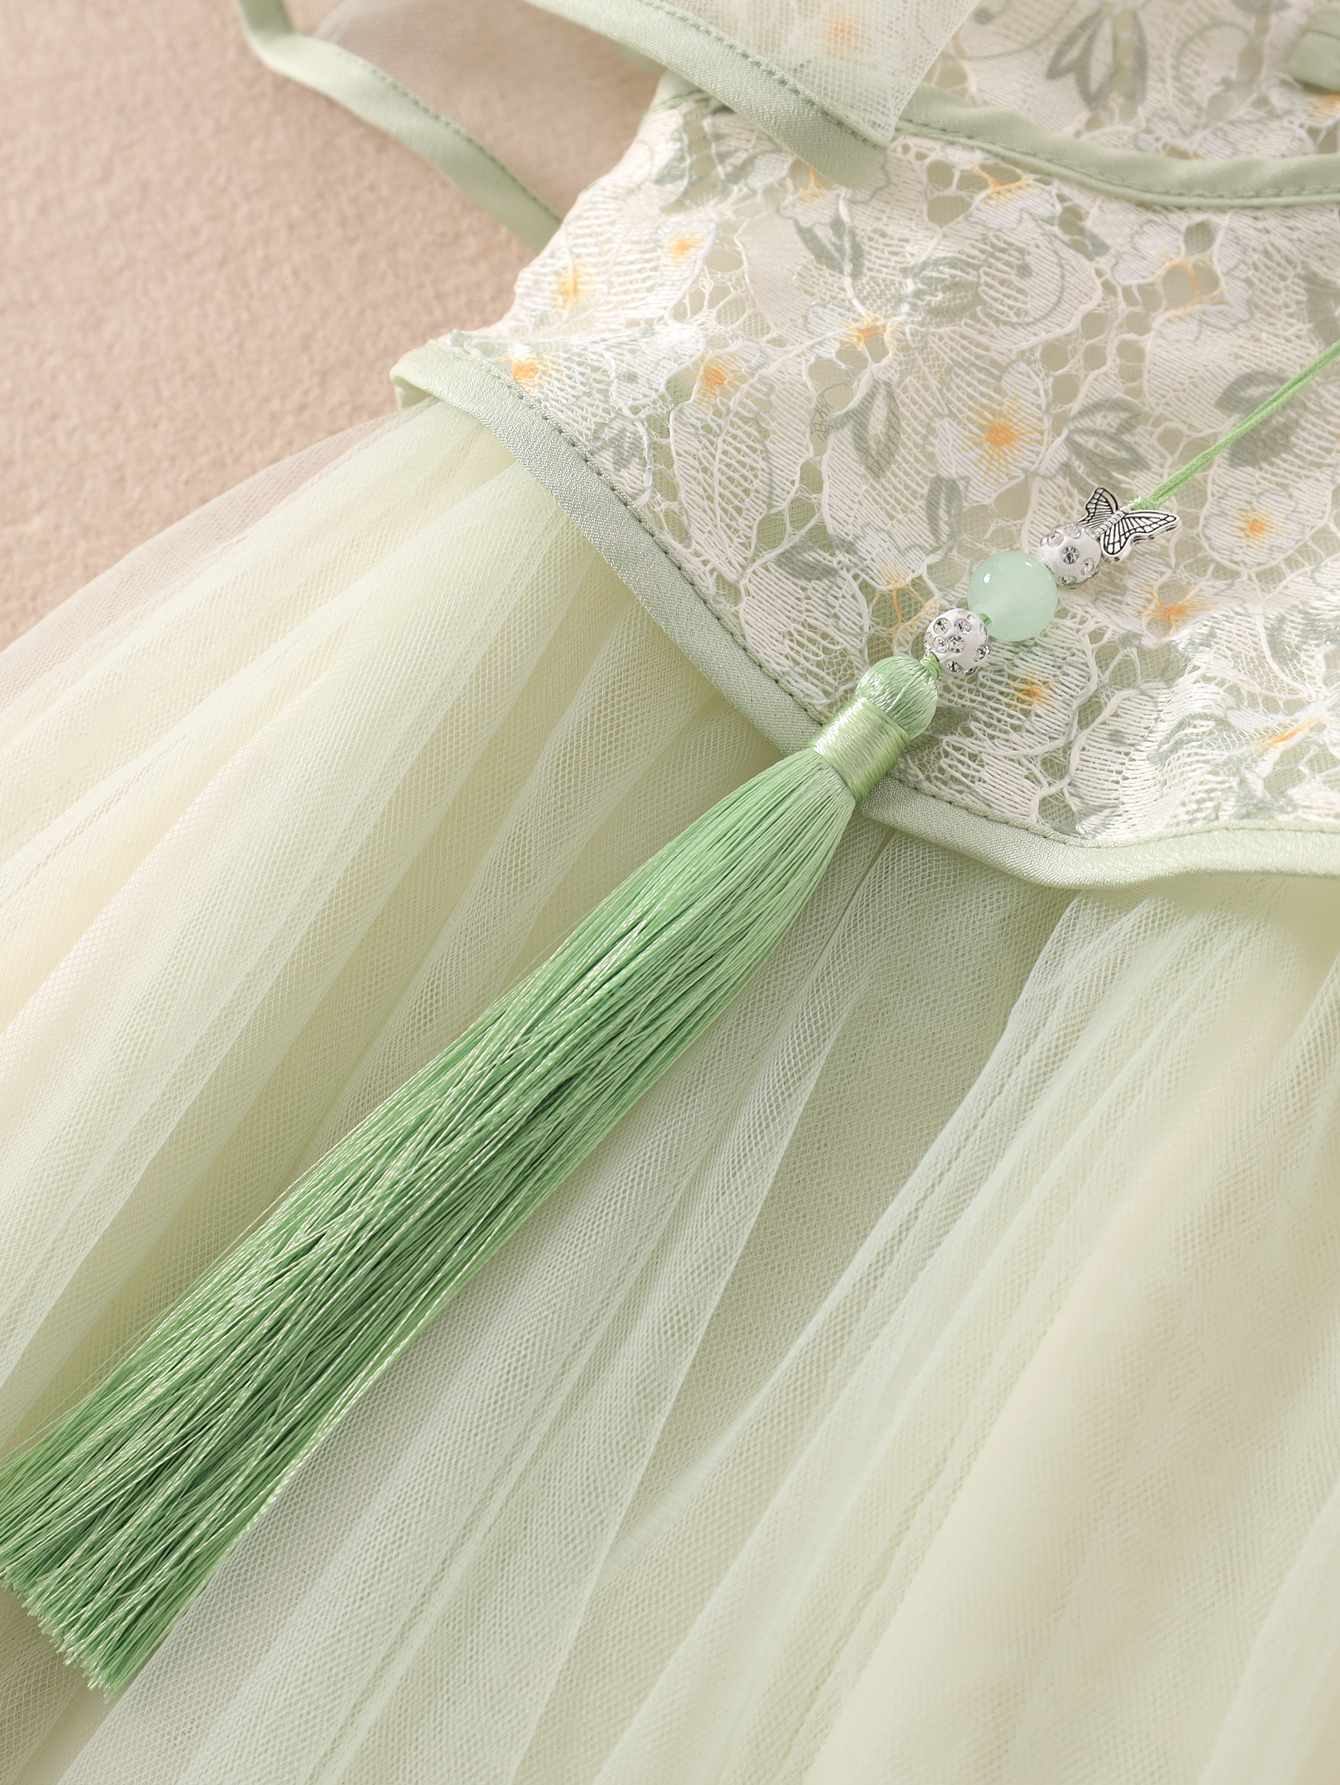 Light green fairy mesh dresses Chinese style qipao best kids clothing stores online wholesale